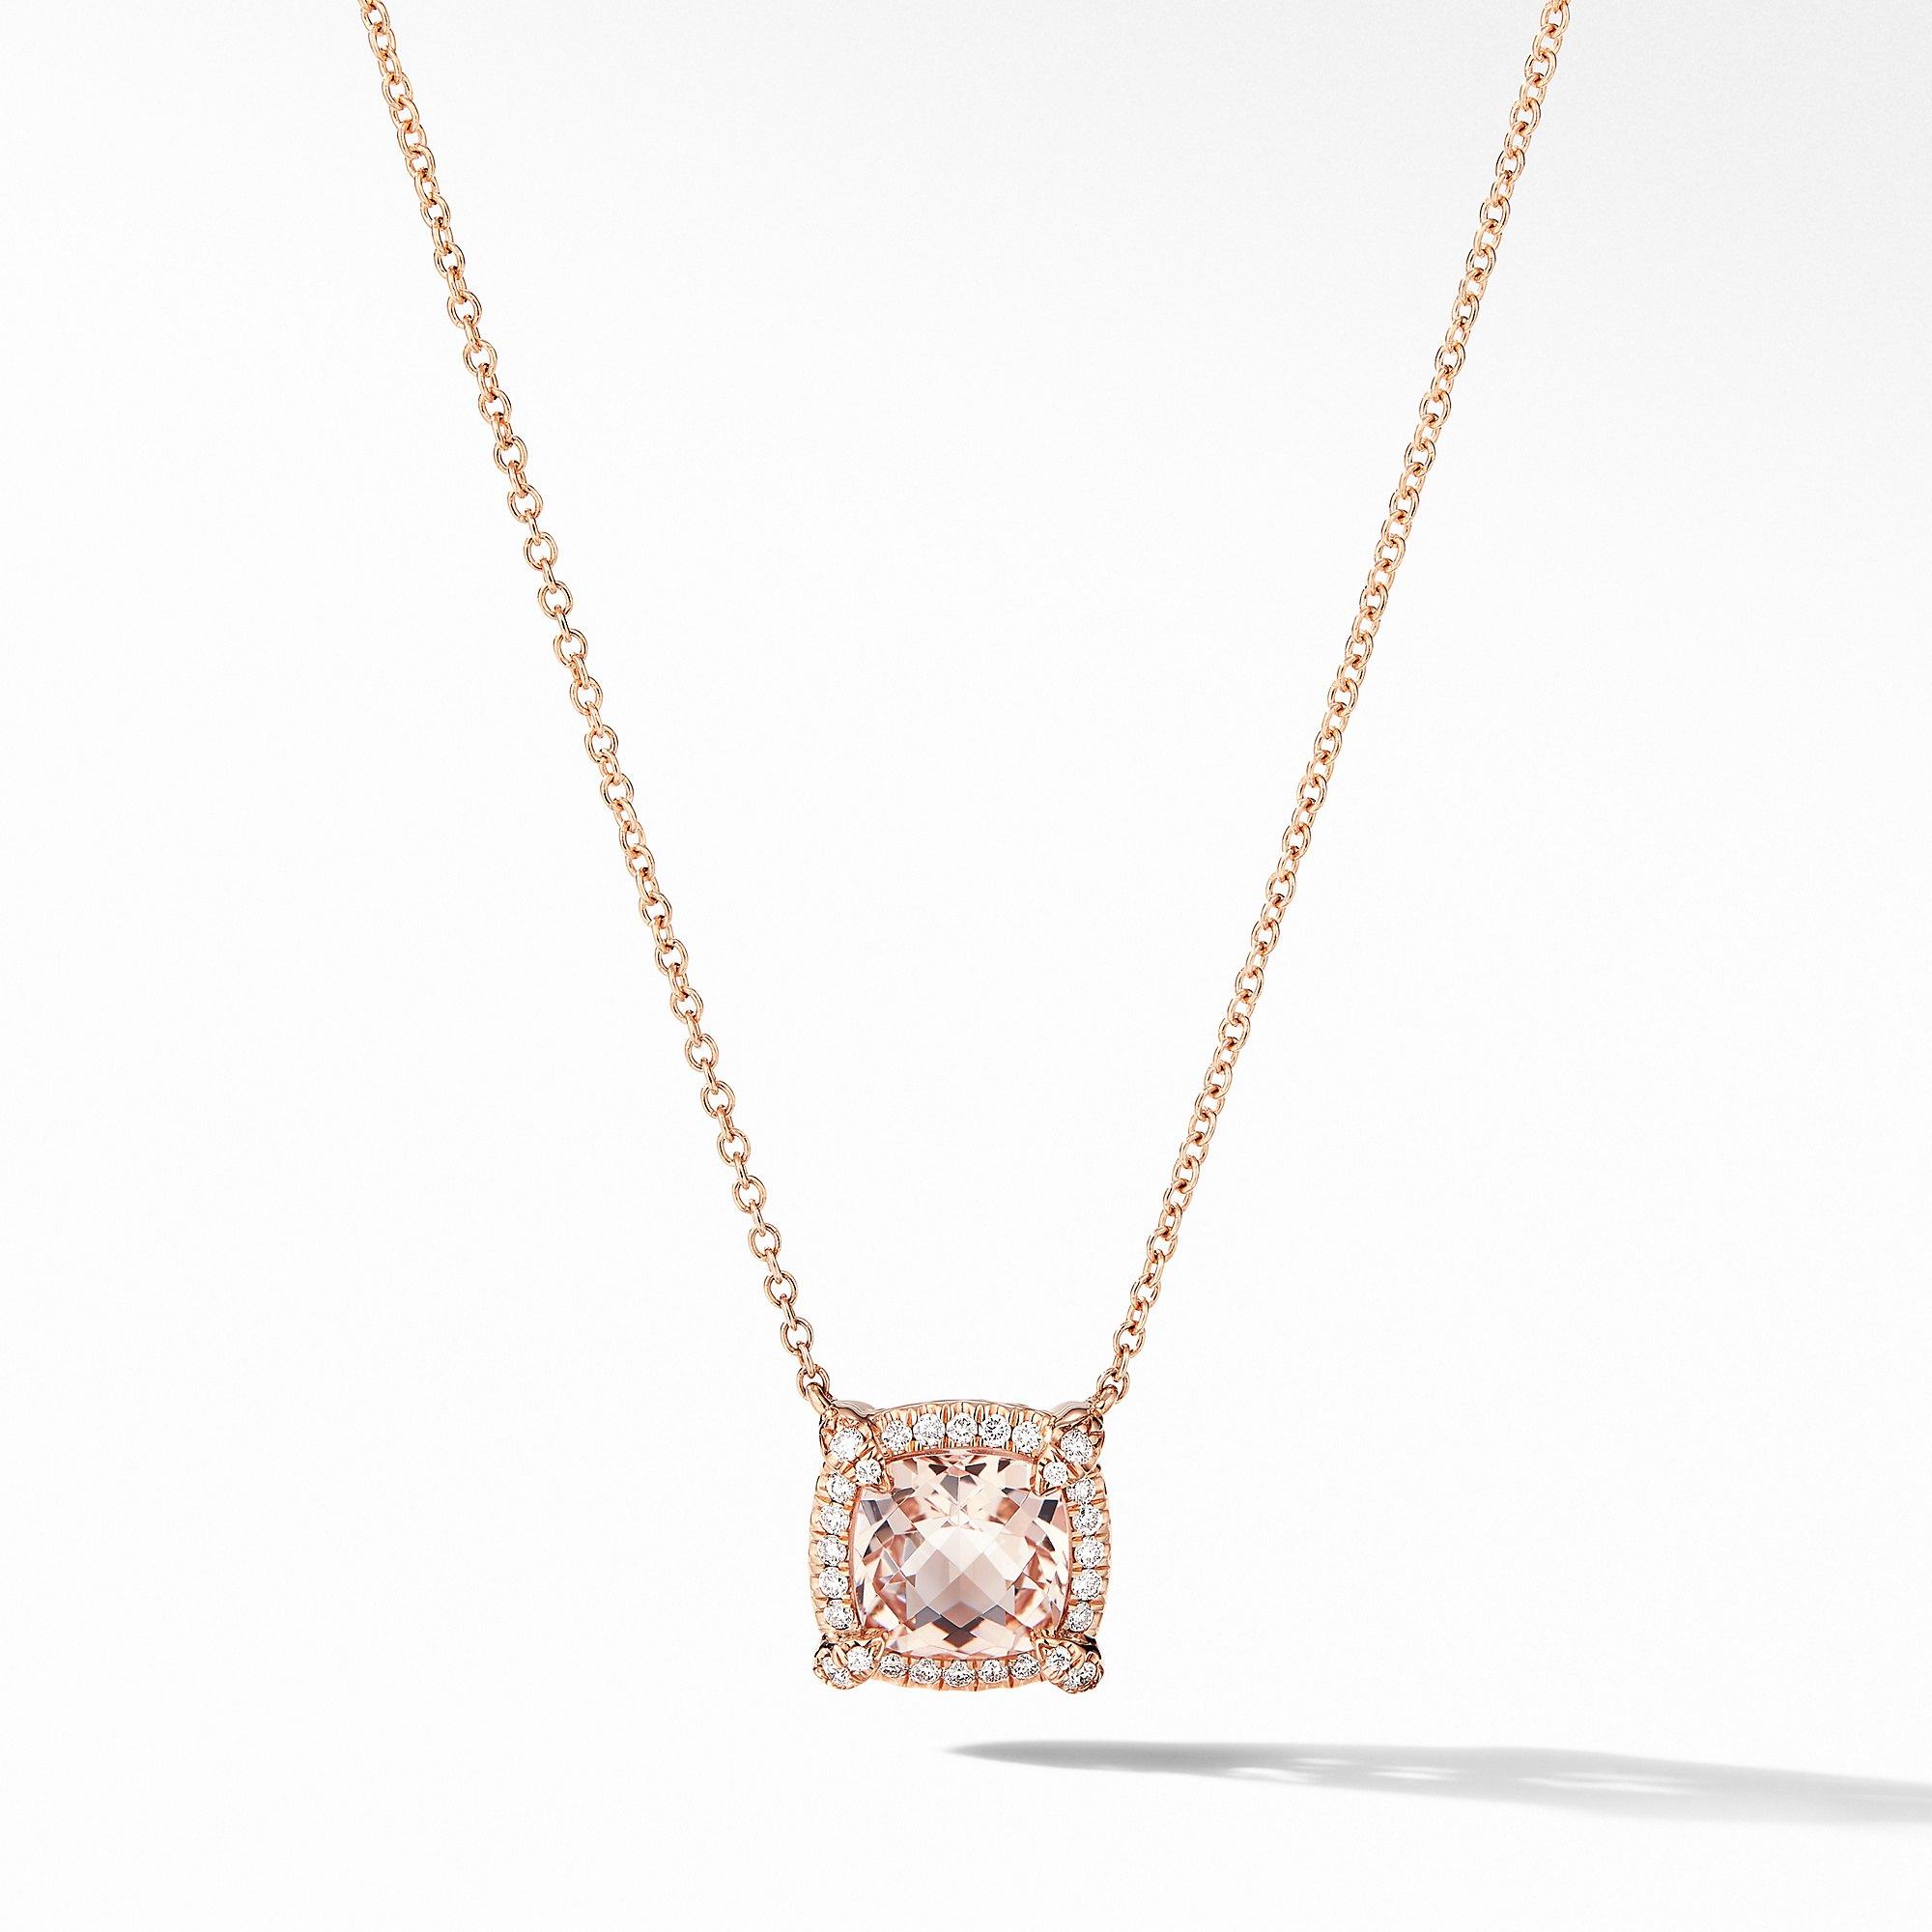 David Yurman Petite Chatelaine Pave Bezel Pendant Necklace in 18k Rose Gold with Morganite